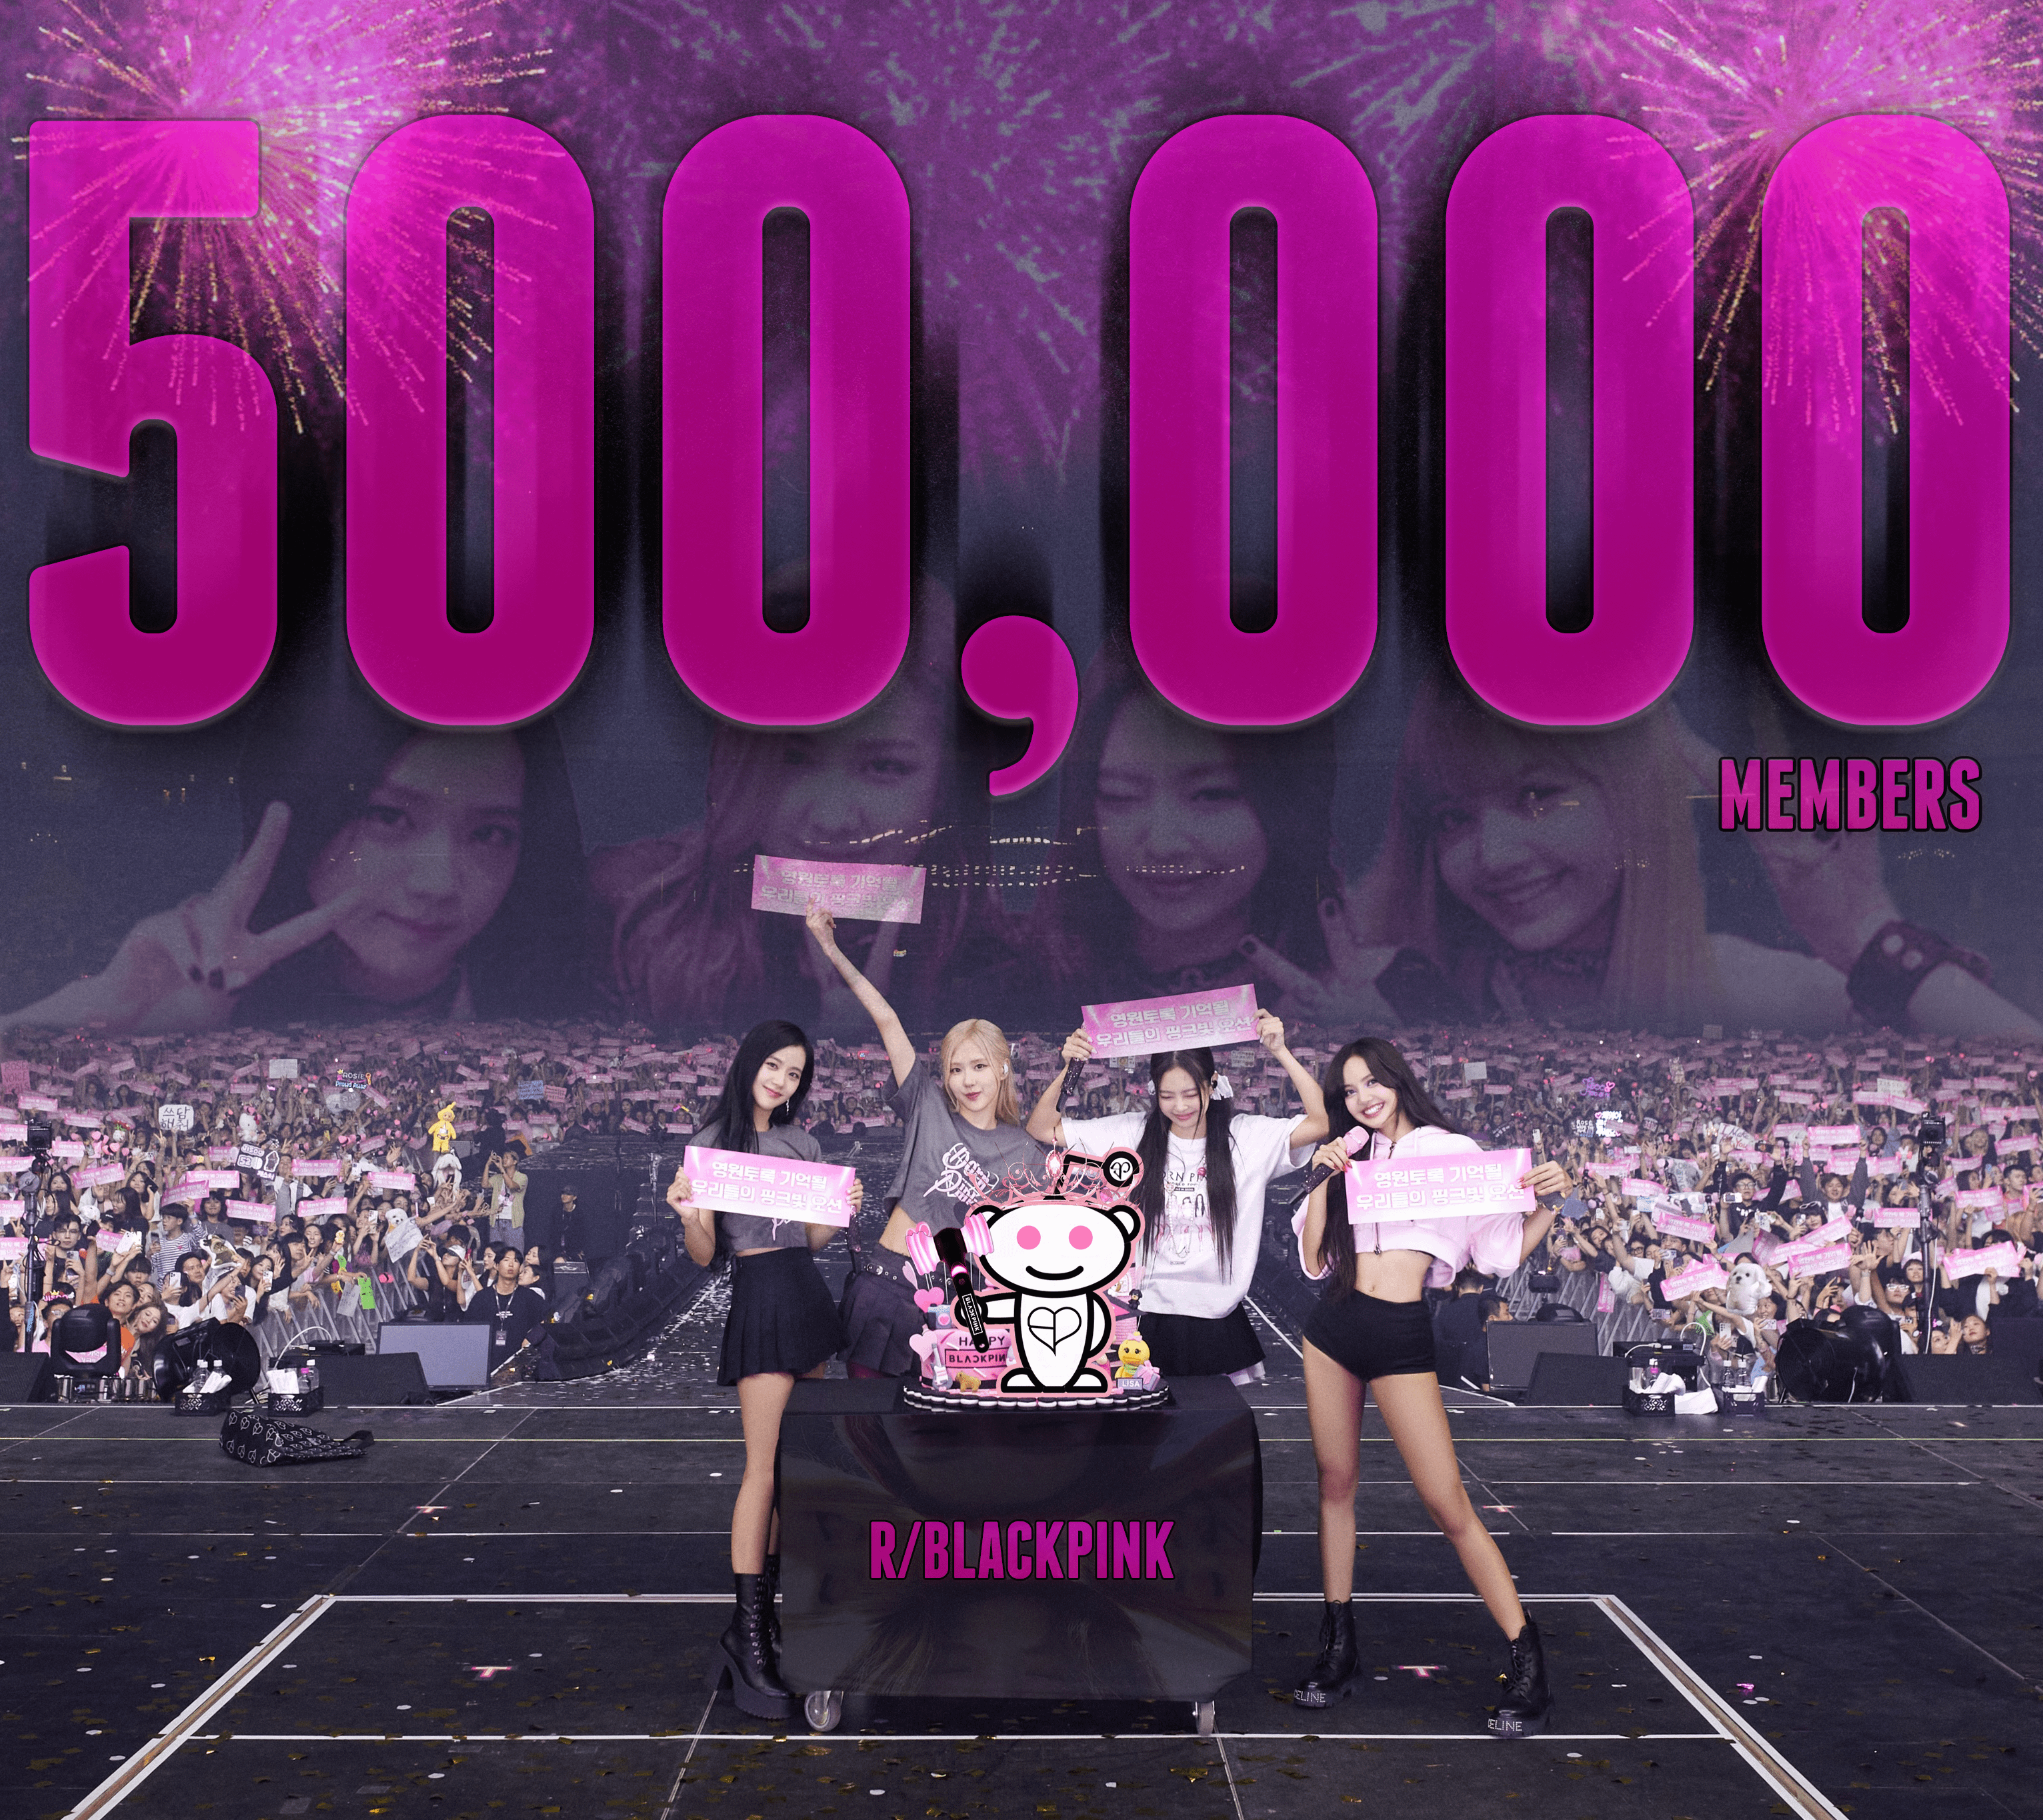 r/BLACKPINK hits 500,000 MEMBERS! Thank you so much!